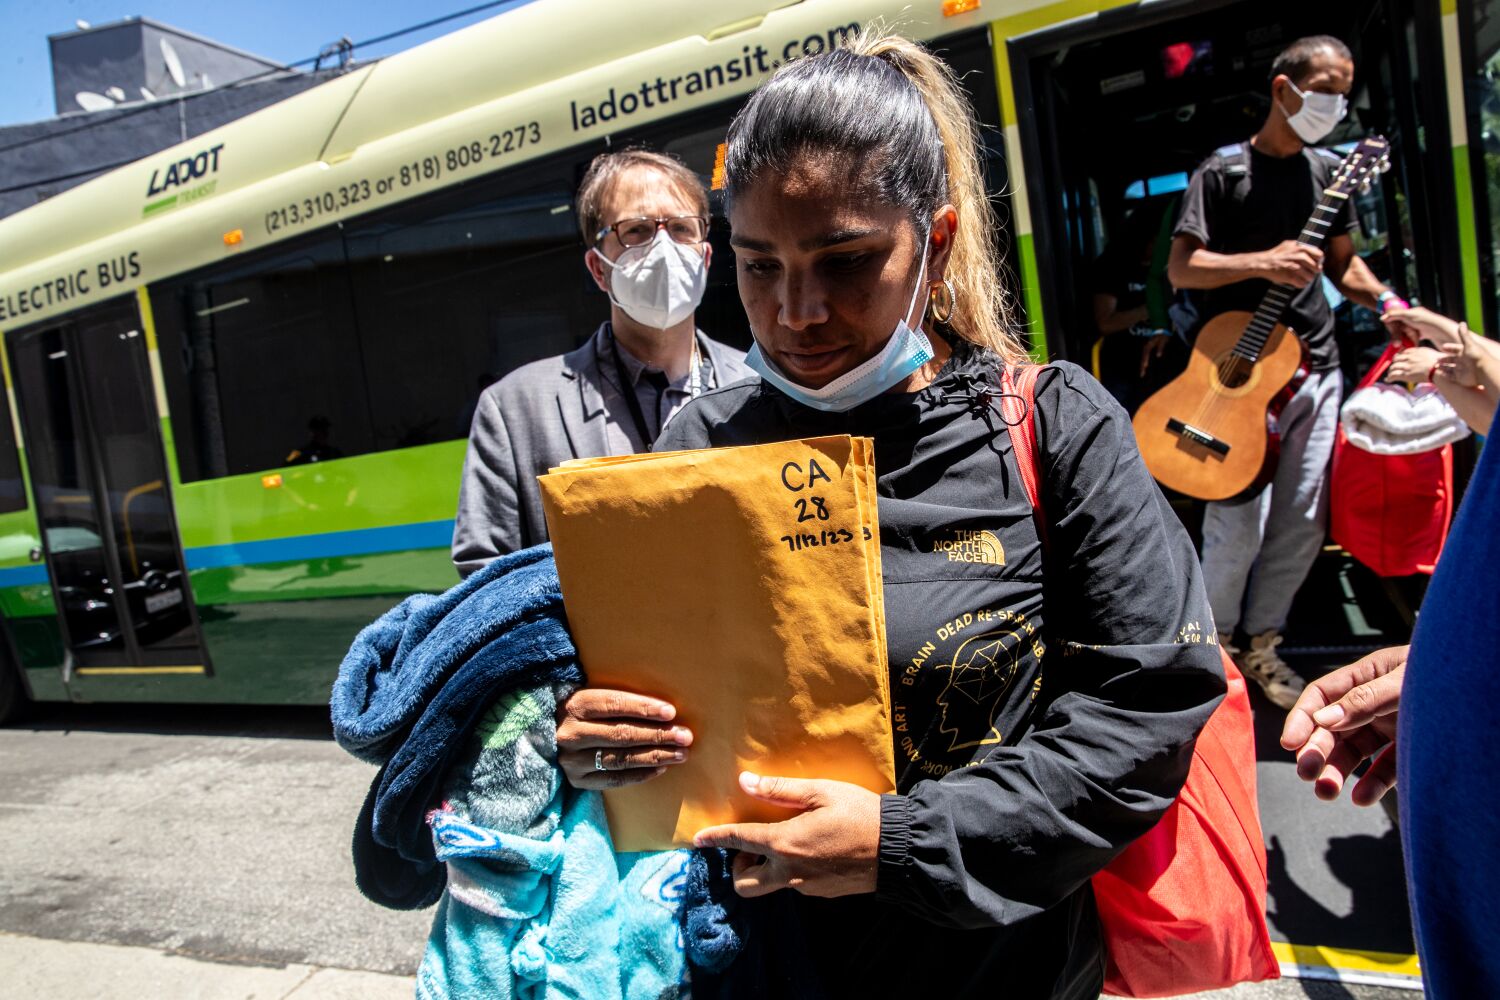 Seventh bus carrying migrant asylum seekers arrives in L.A. from Texas